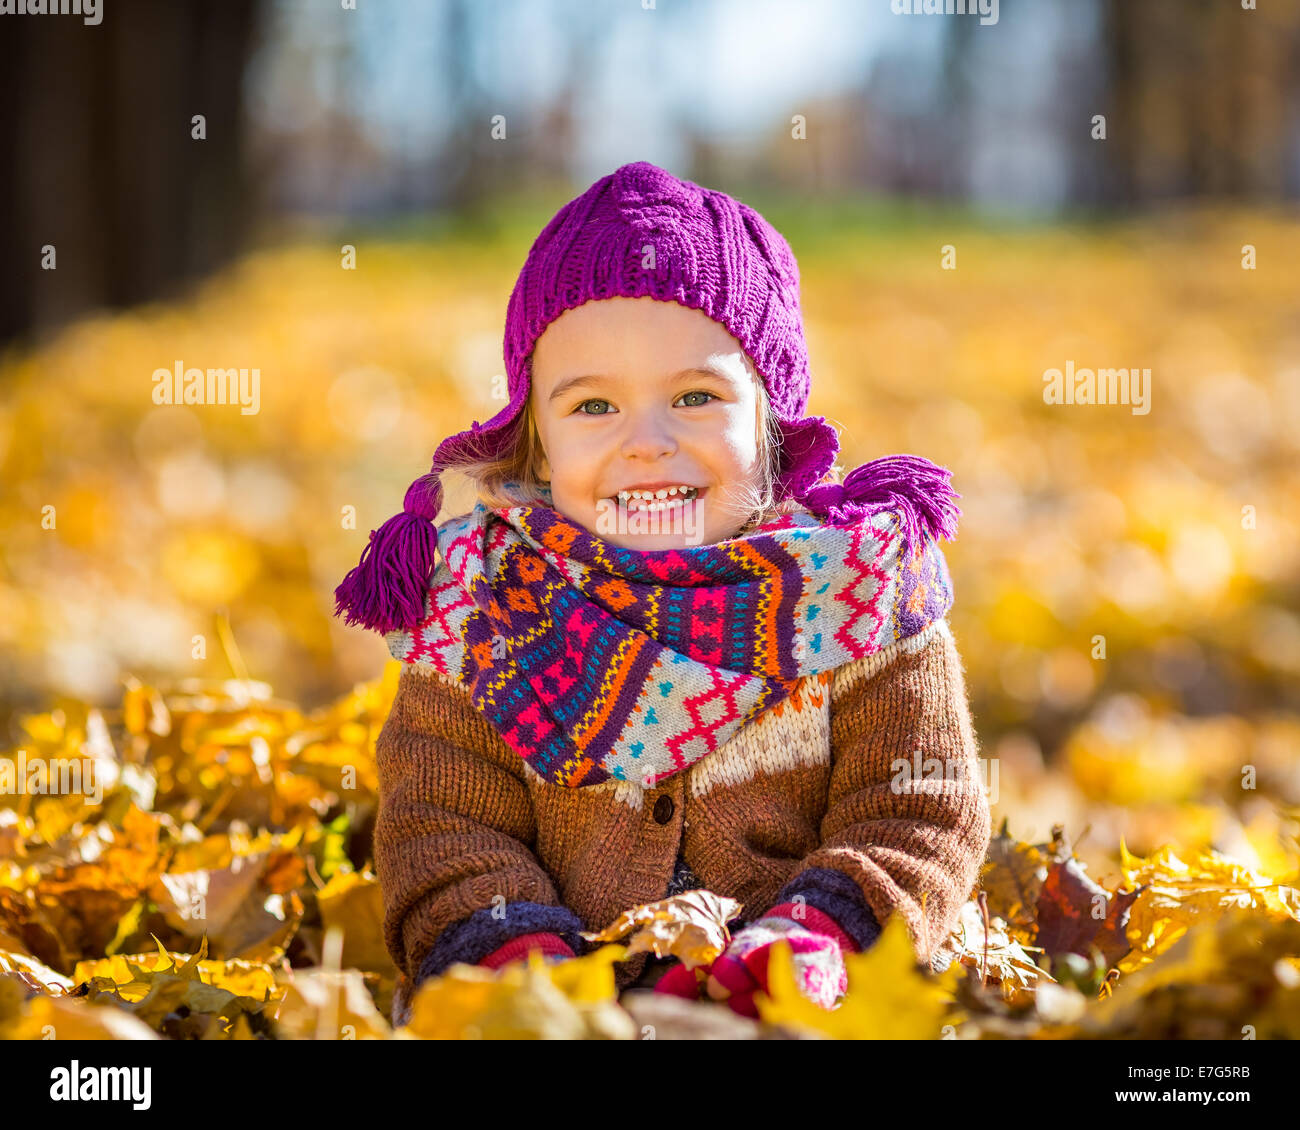 Happy little girl playing in the autumn park Banque D'Images